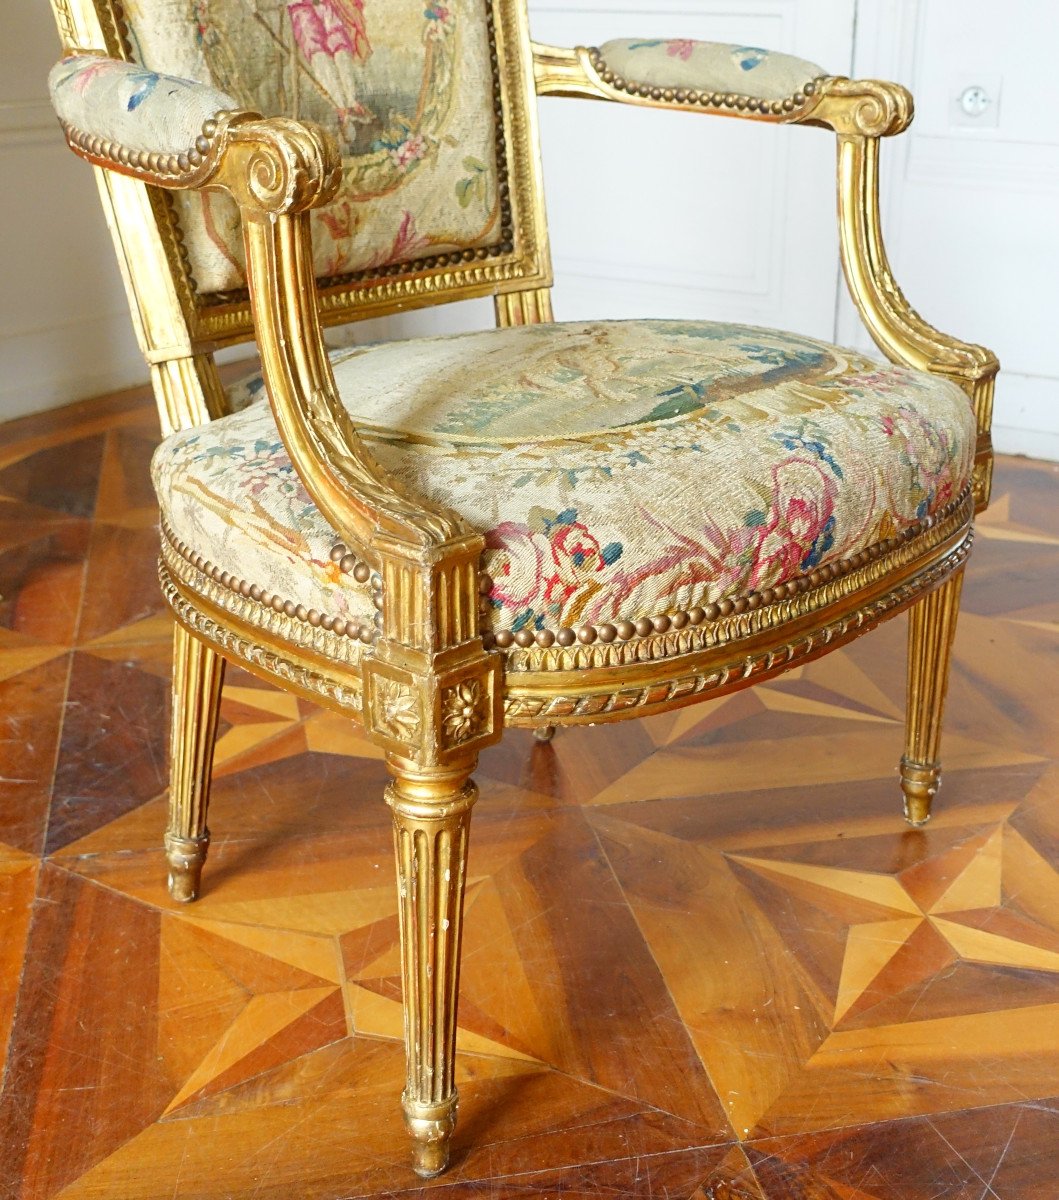 Pair Of Cabriolet Armchairs In Golden Wood And Tapestry, Louis XVI Period - Boulard Model-photo-3